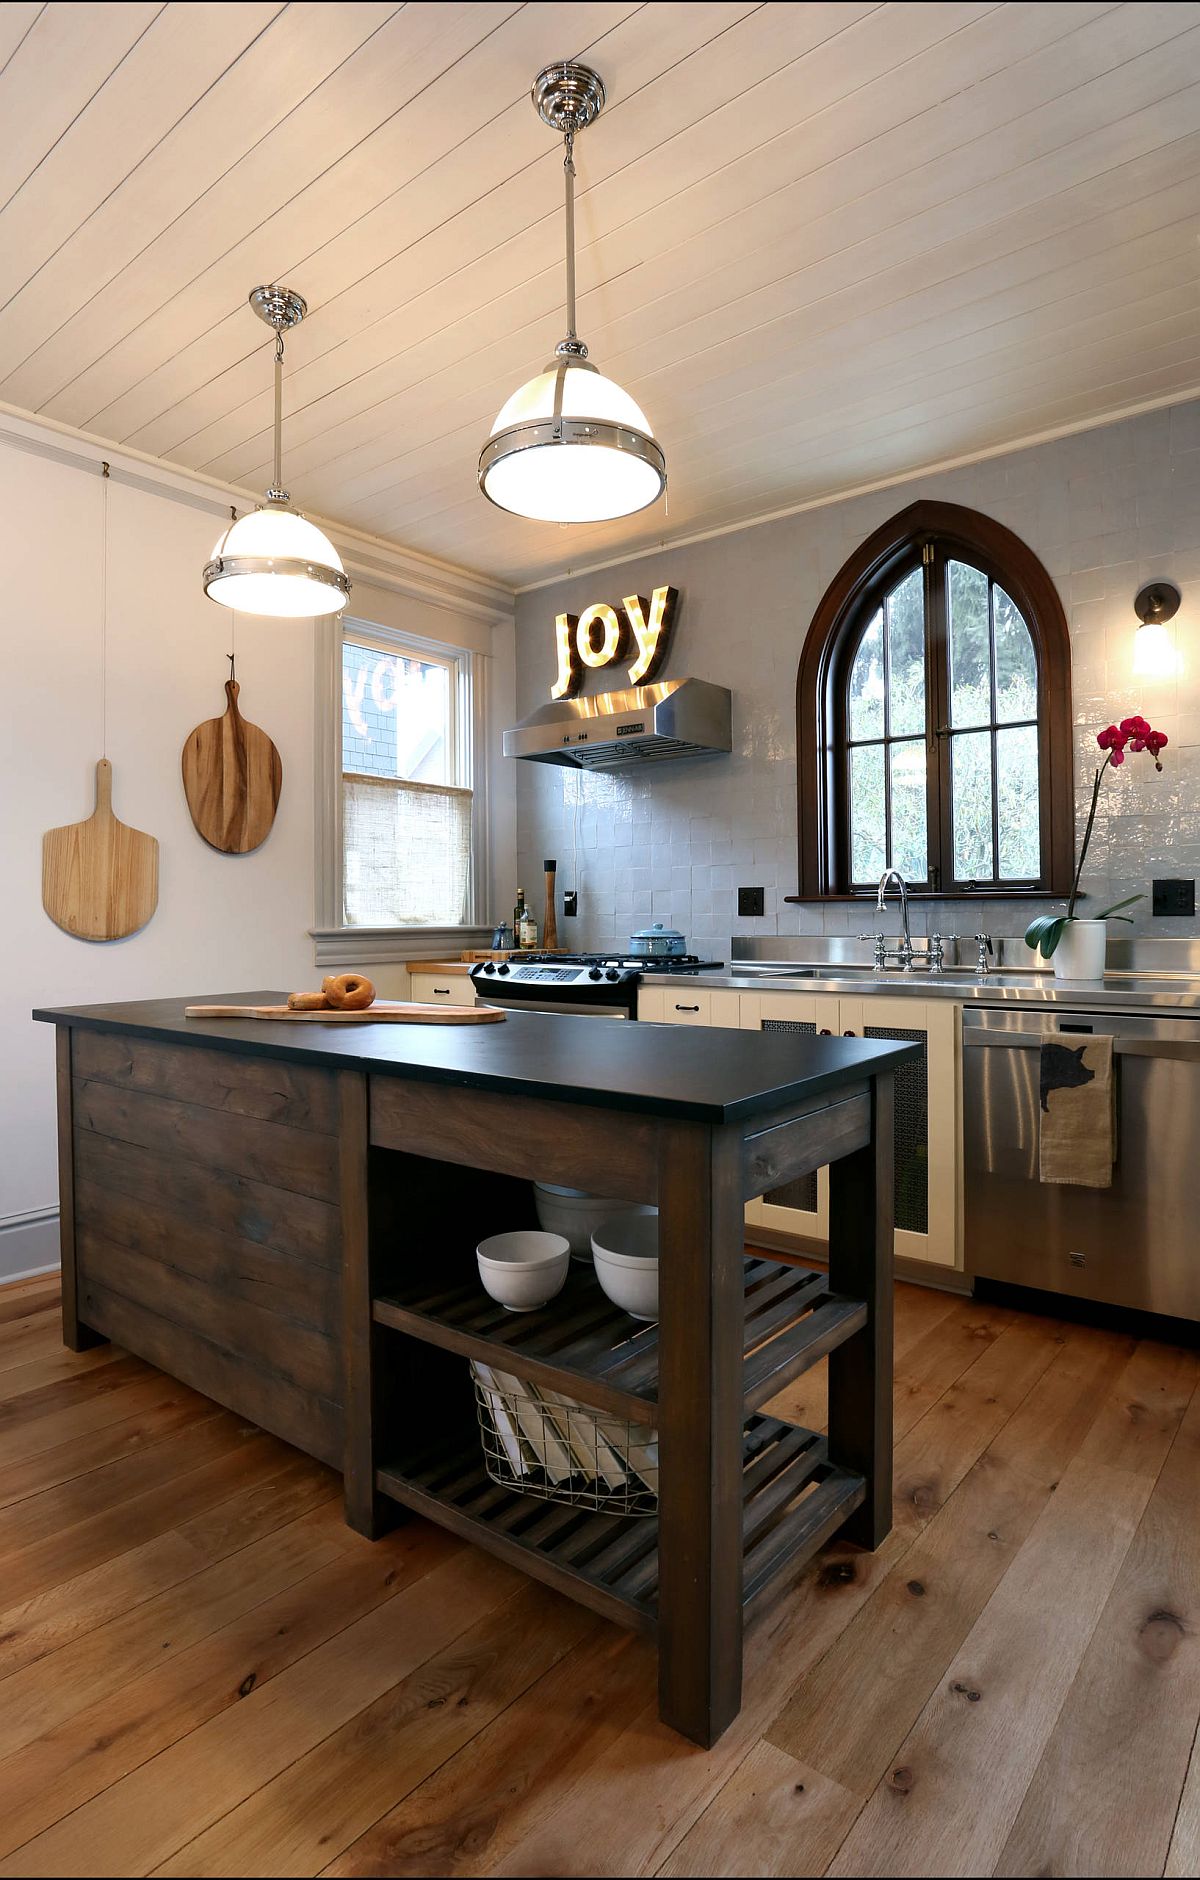 Modern eclectic touches are seamlessly combined with Victorian style in this kitchen